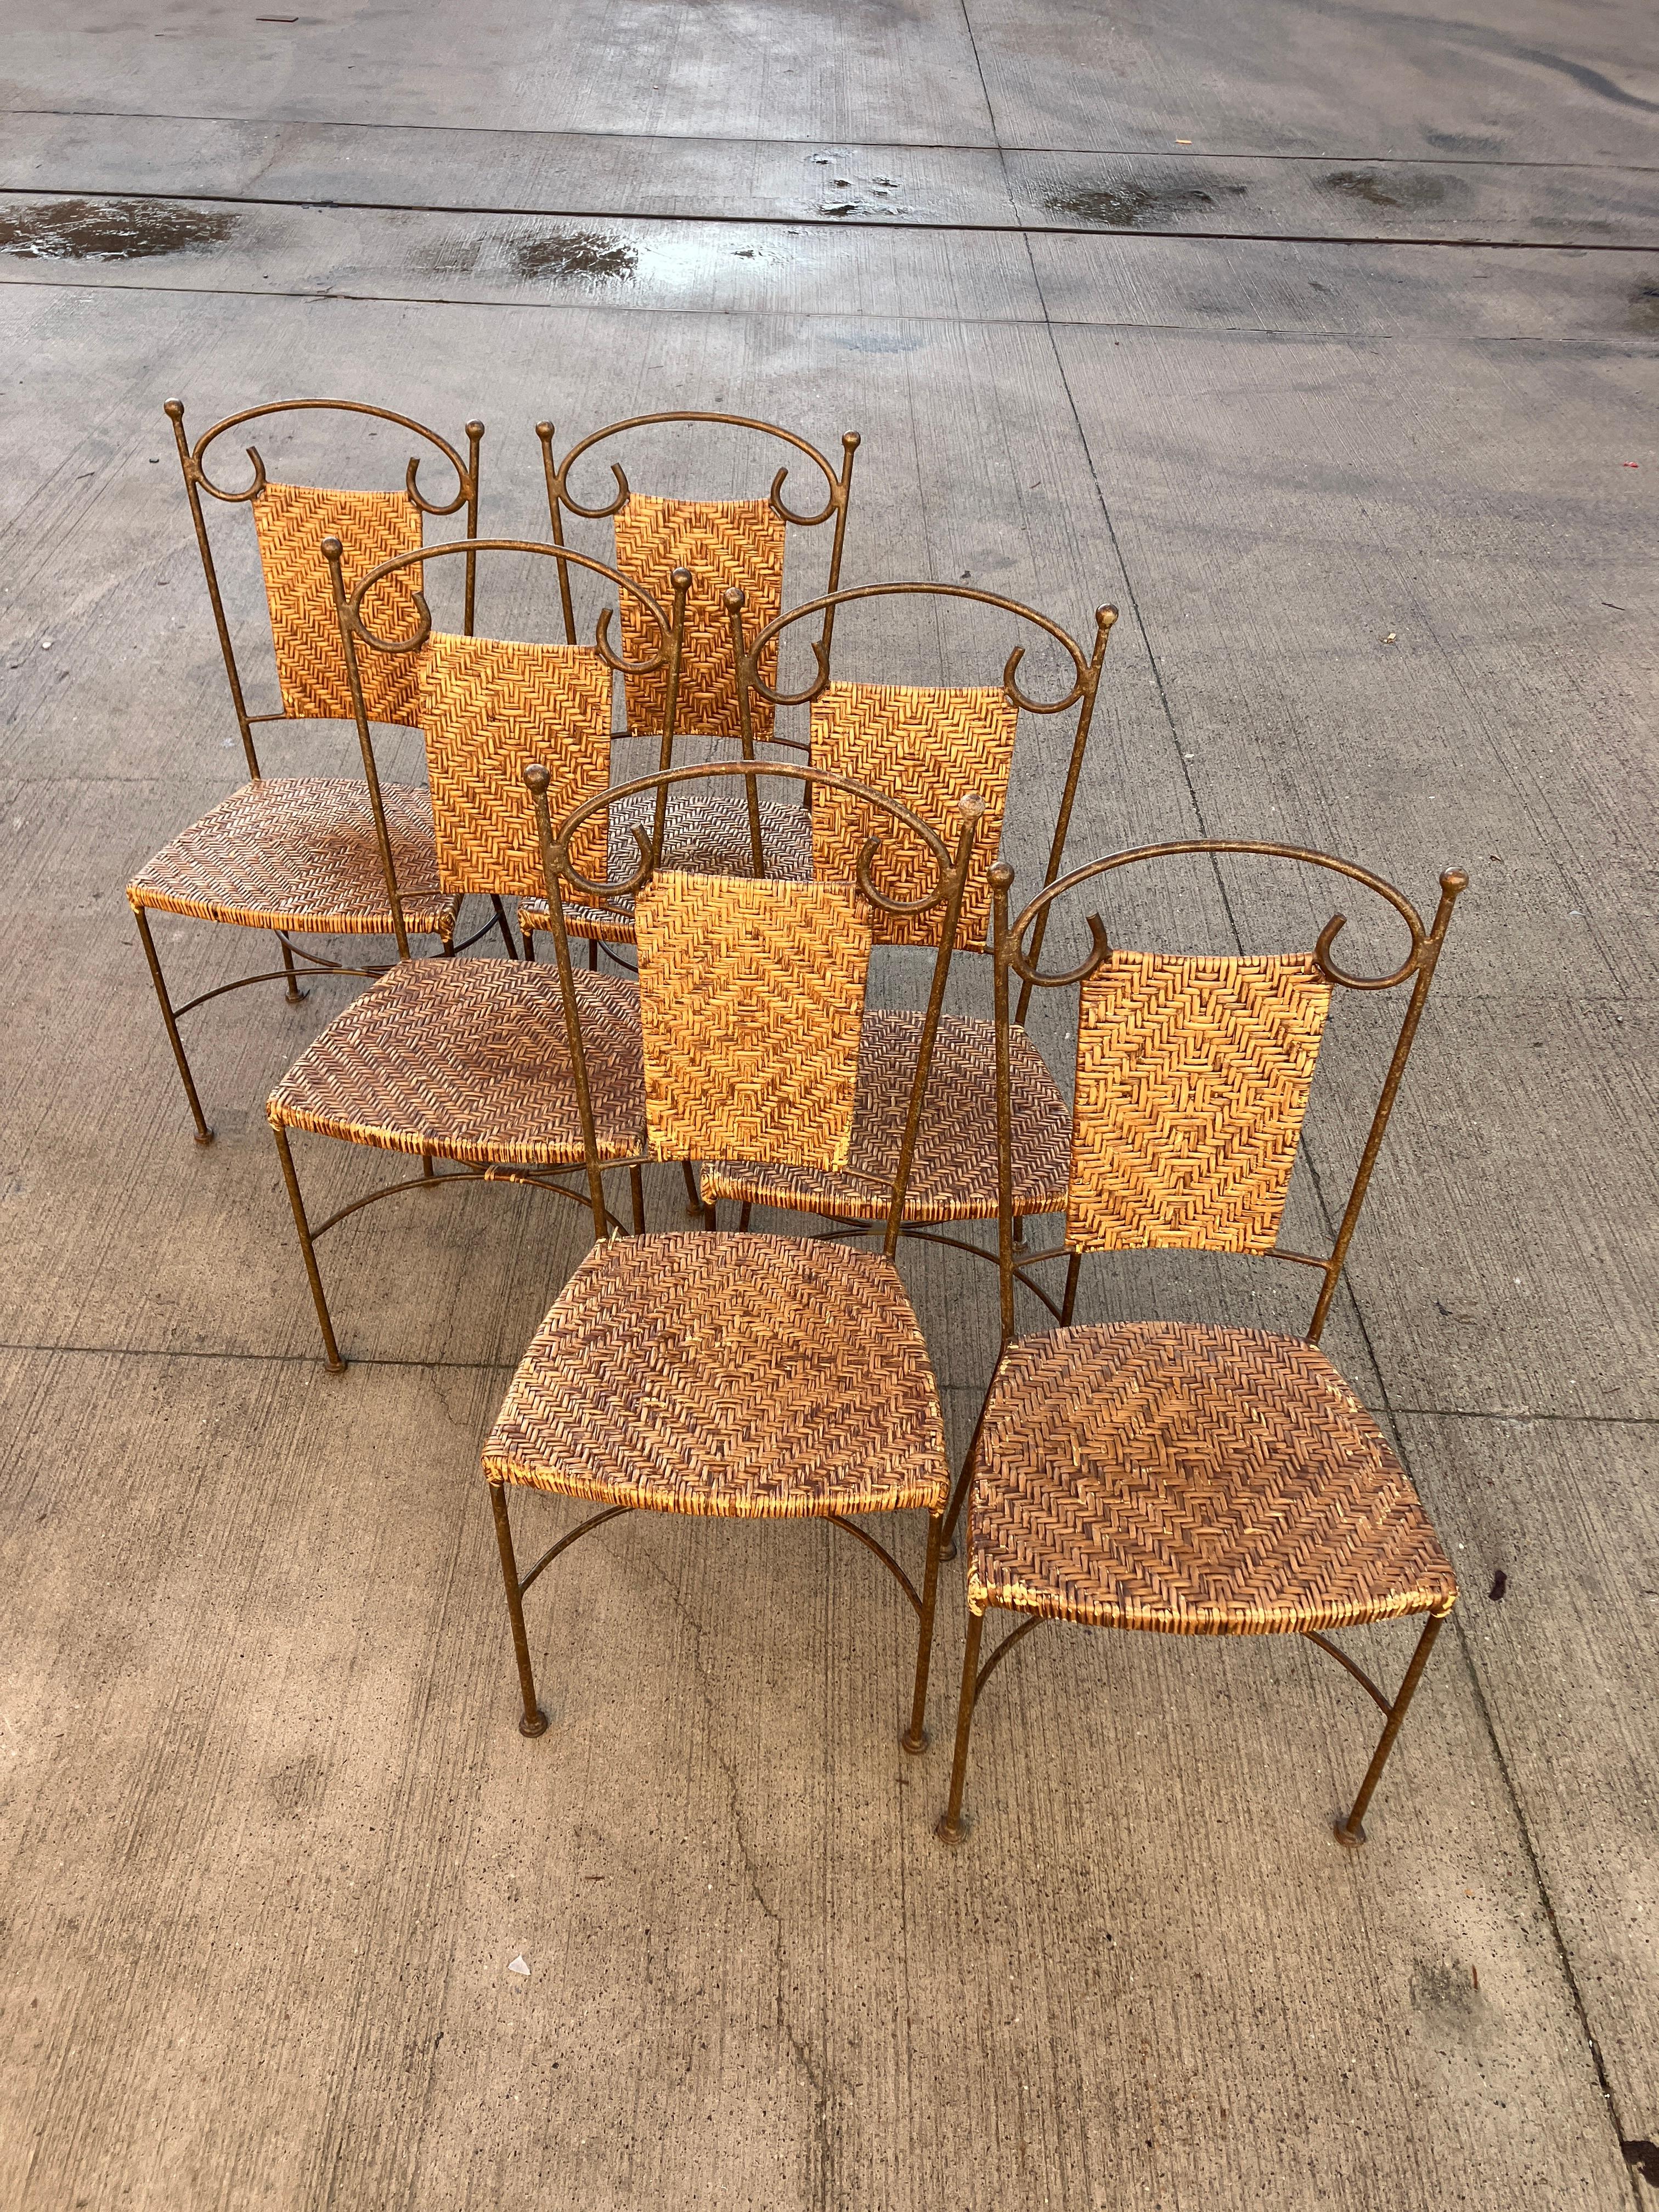 Metalwork Vintage wrought Iron Dining Chairs with Wicker Seating x 6